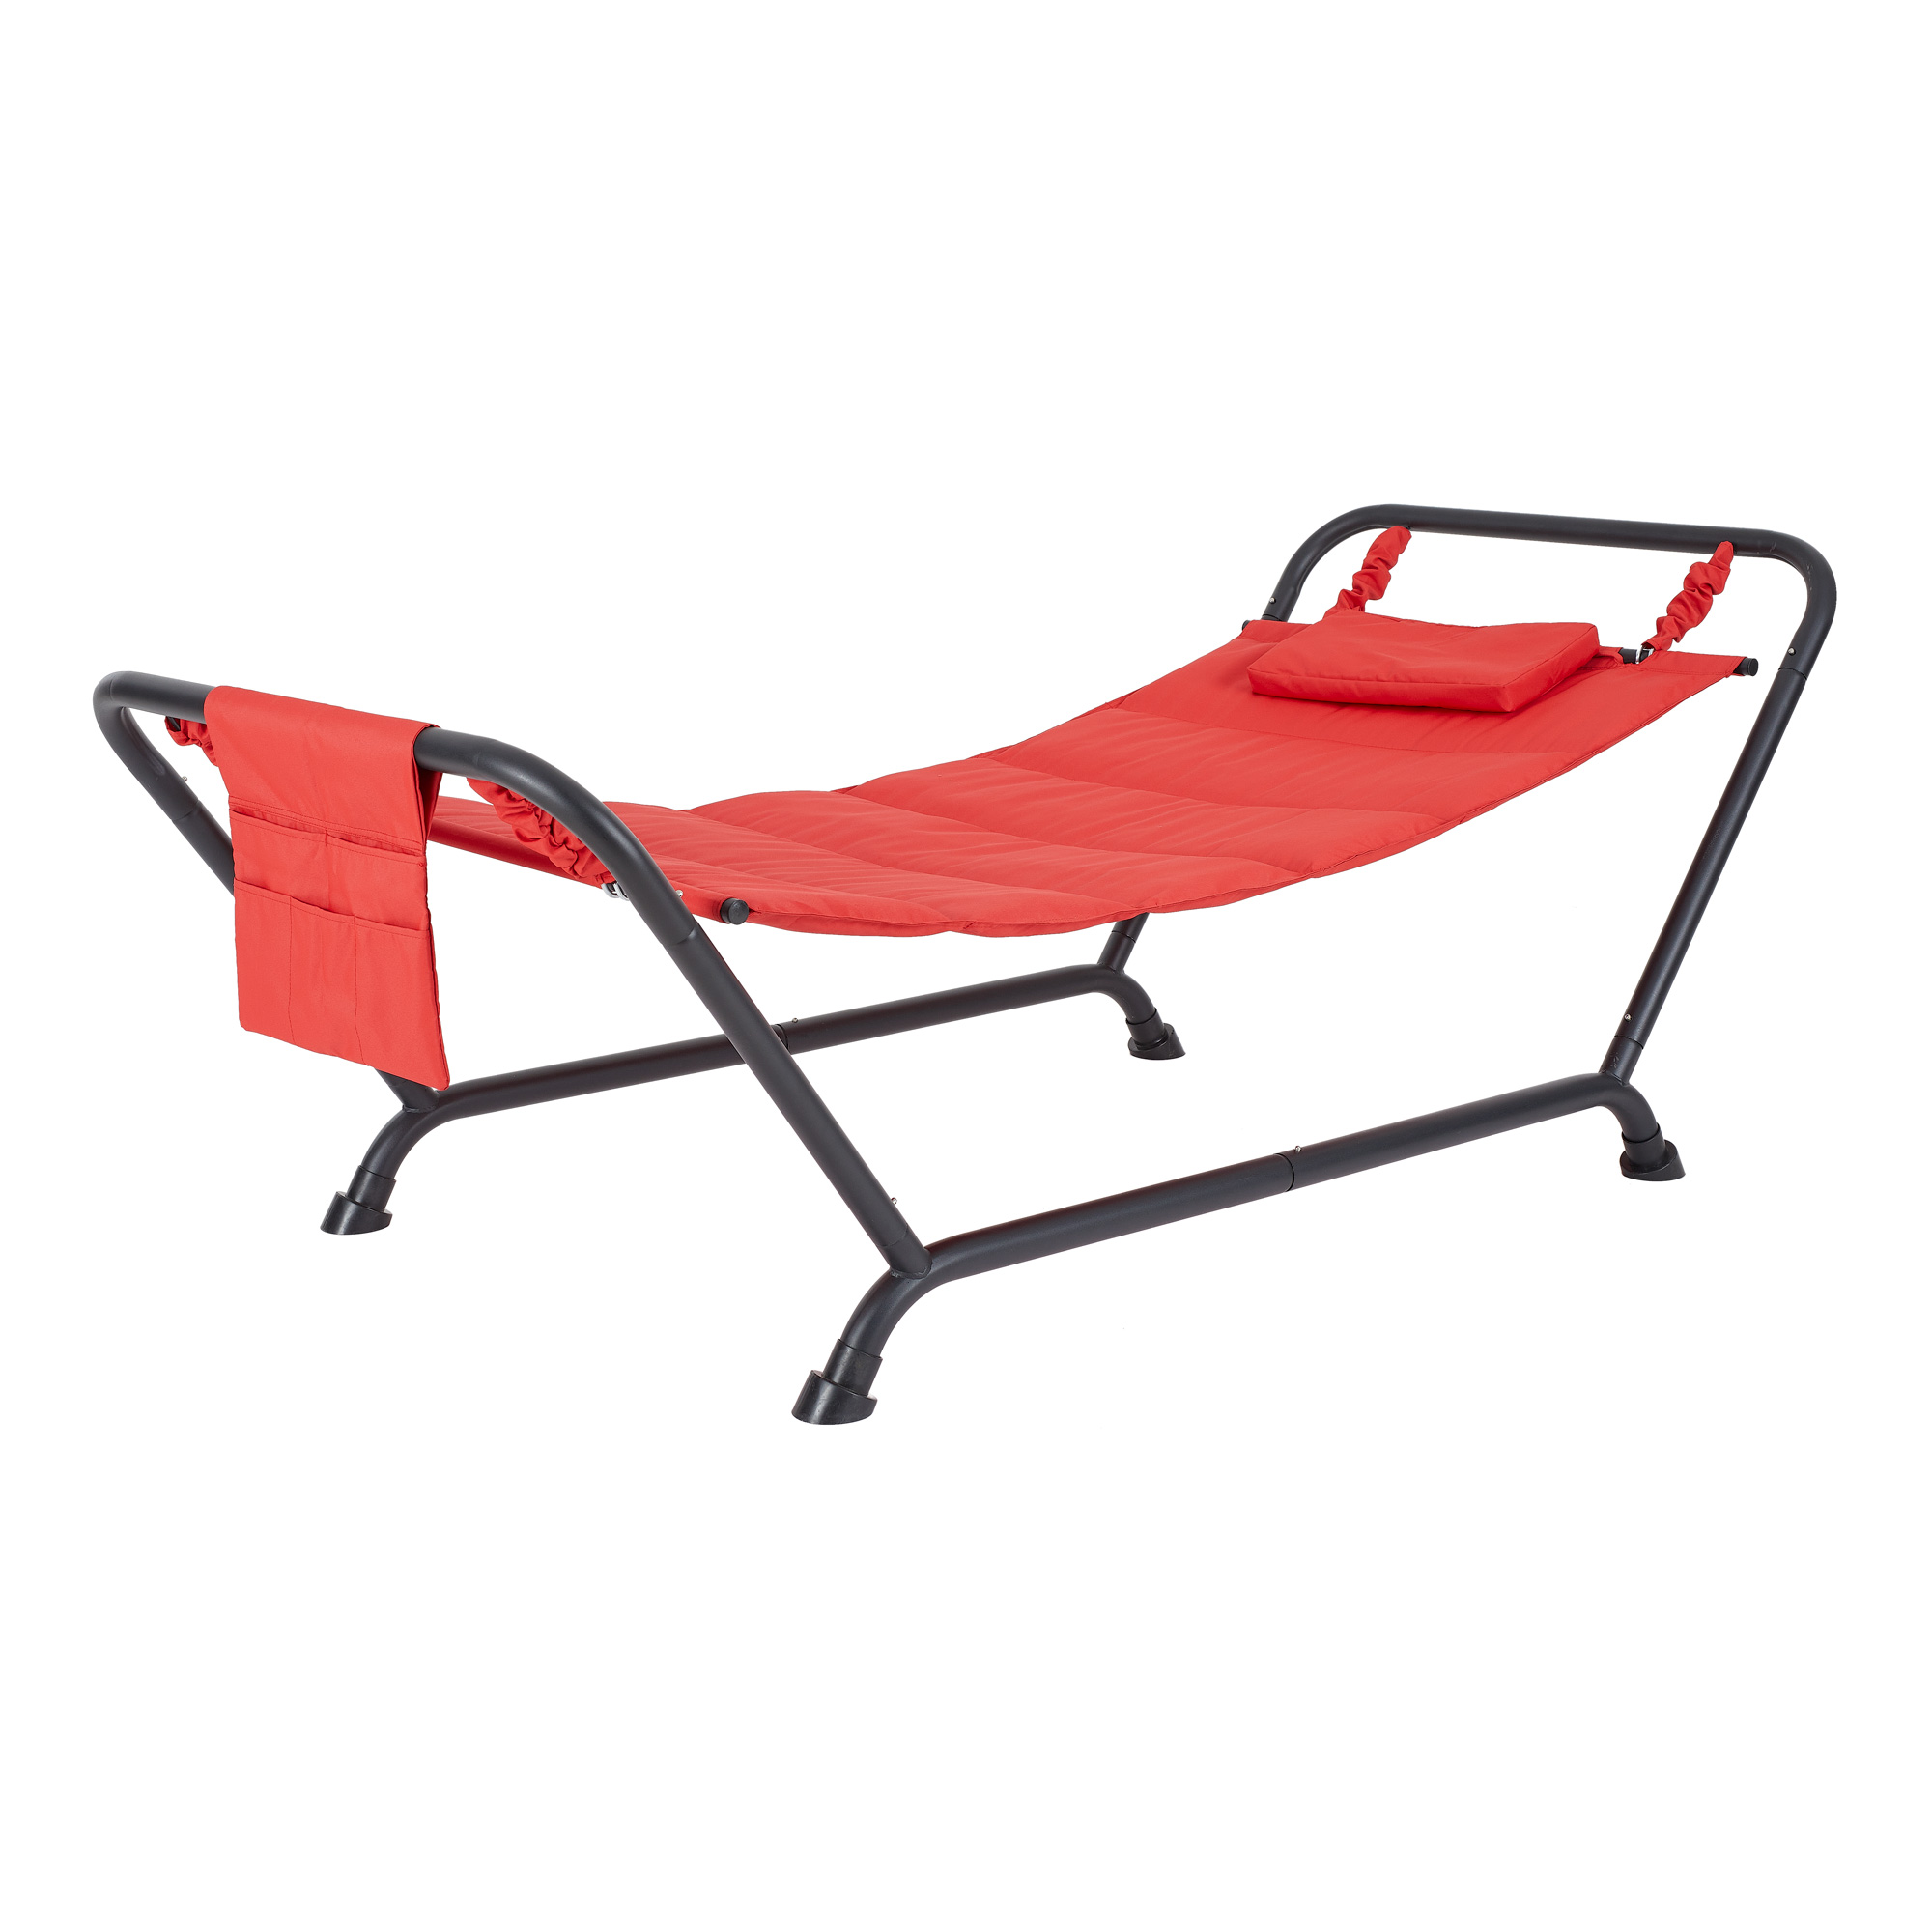 Mainstays Belden Park Polyester Hammock with Stand and Pillow for Outdoor Patio, Multi color, Assembled Length 90.55" - image 1 of 6